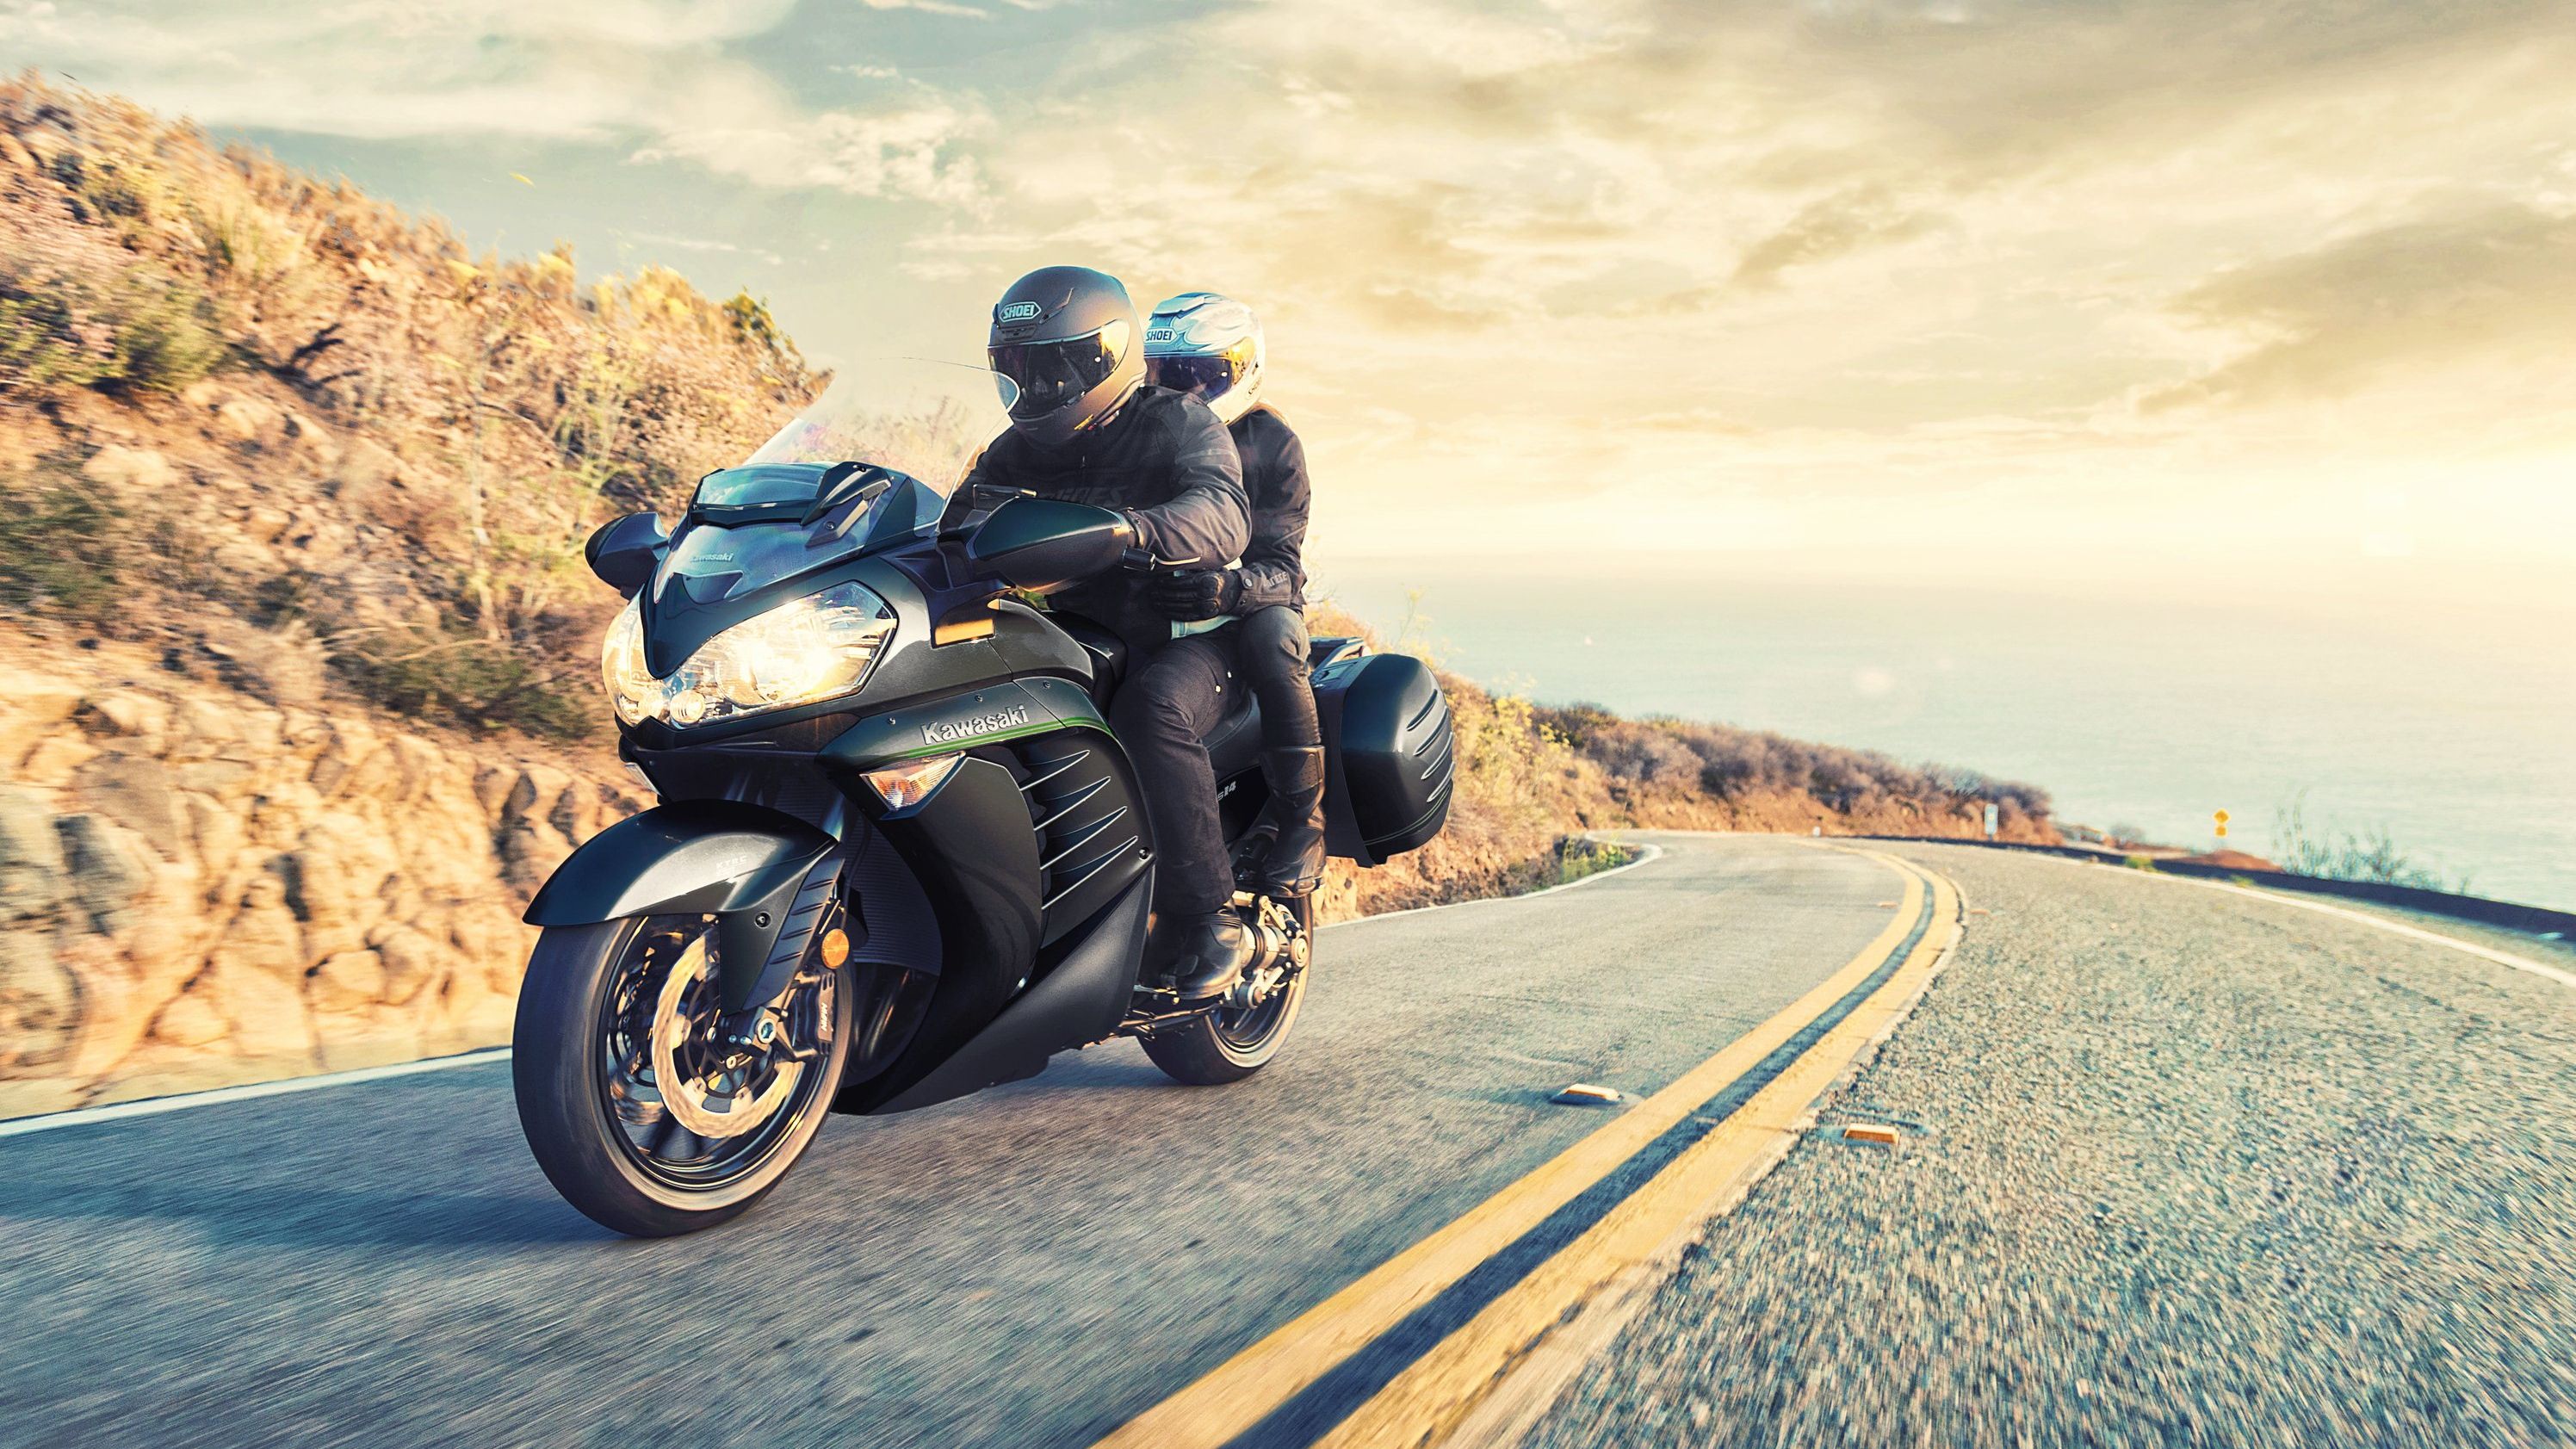 2020 Kawasaki Tantalizes Us With Hints Of A Tourer With A Blower